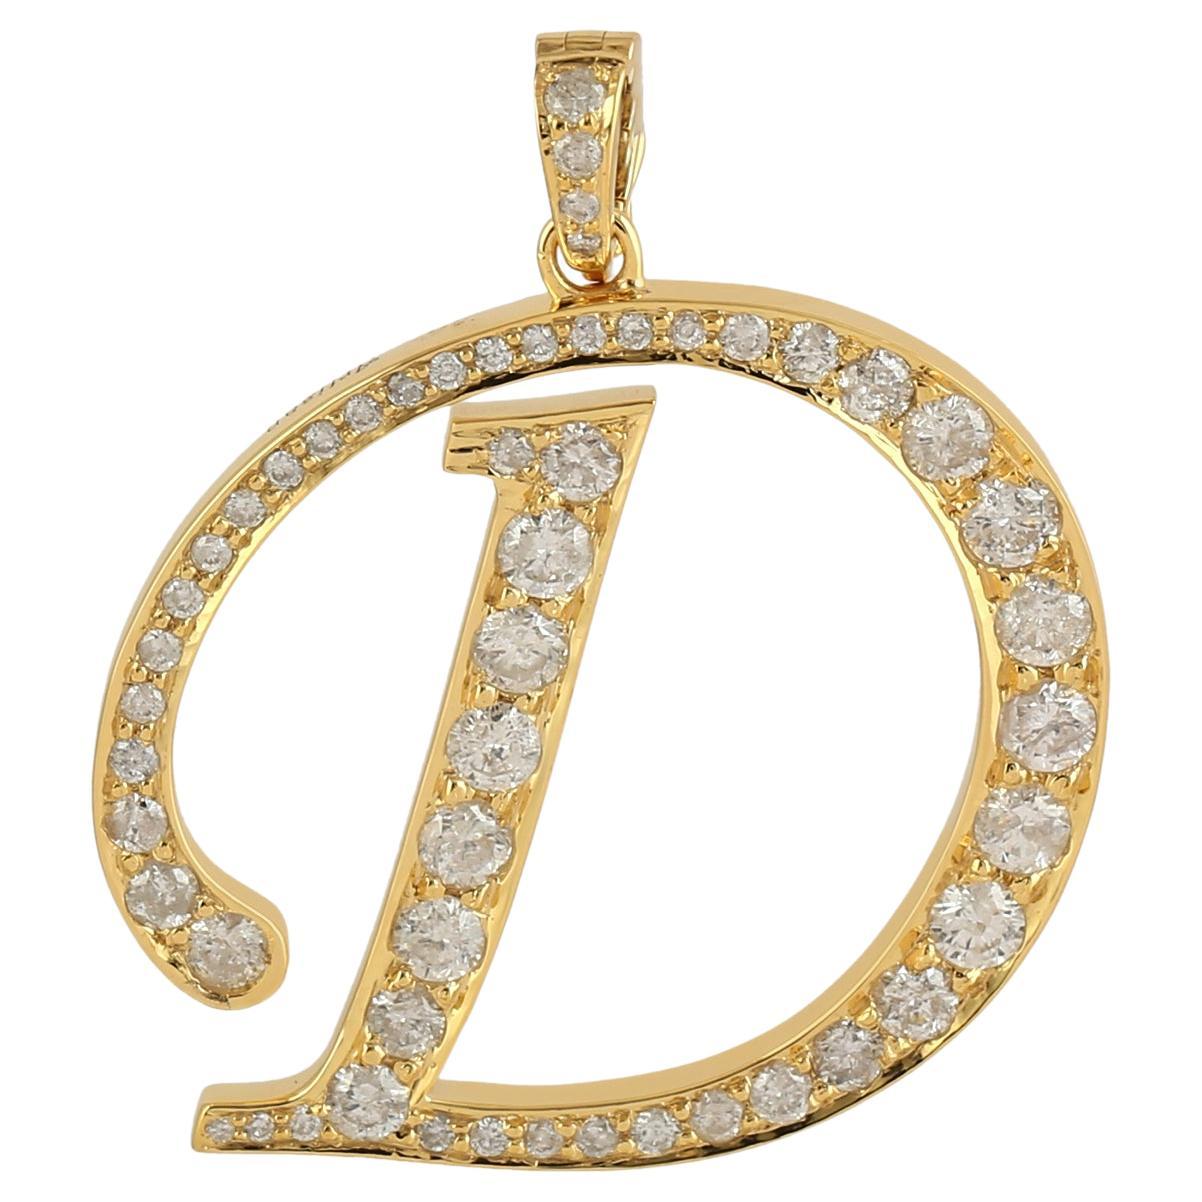 Initial D Alphabet Letter Charm Pendant w/ Pave Diamonds Made In 14K Yellow Gold